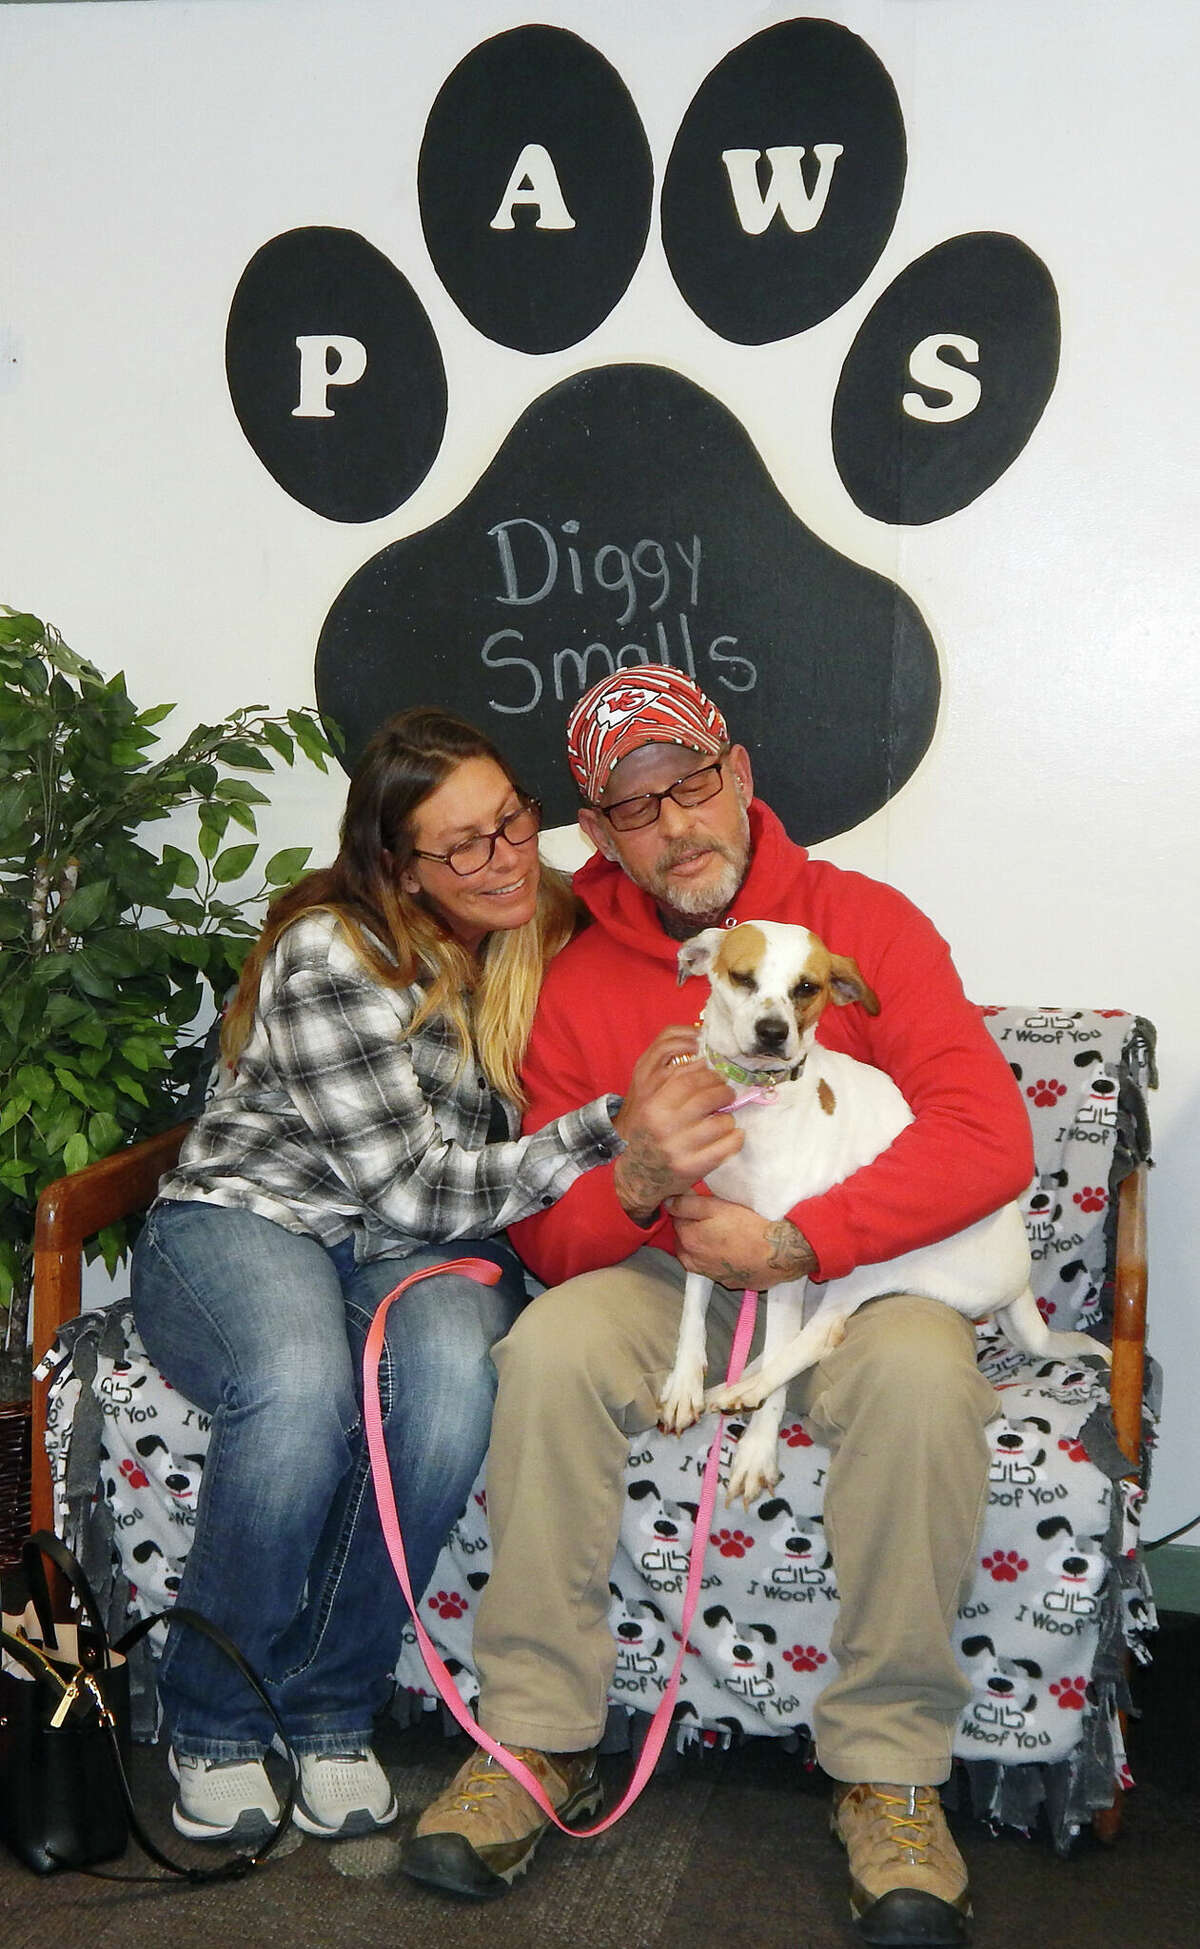 Laura and Tony Schmult say hello Friday afternoon to the newest member of their family, a Chihuahua-Jack Russell terrier mix-breed dog formerly known as Diggy Small. The couple, who said they plan to call her Little D, finalized the dog's adoption from the Protecting Animal Welfare Society, or PAWS, shelter in Jacksonville.